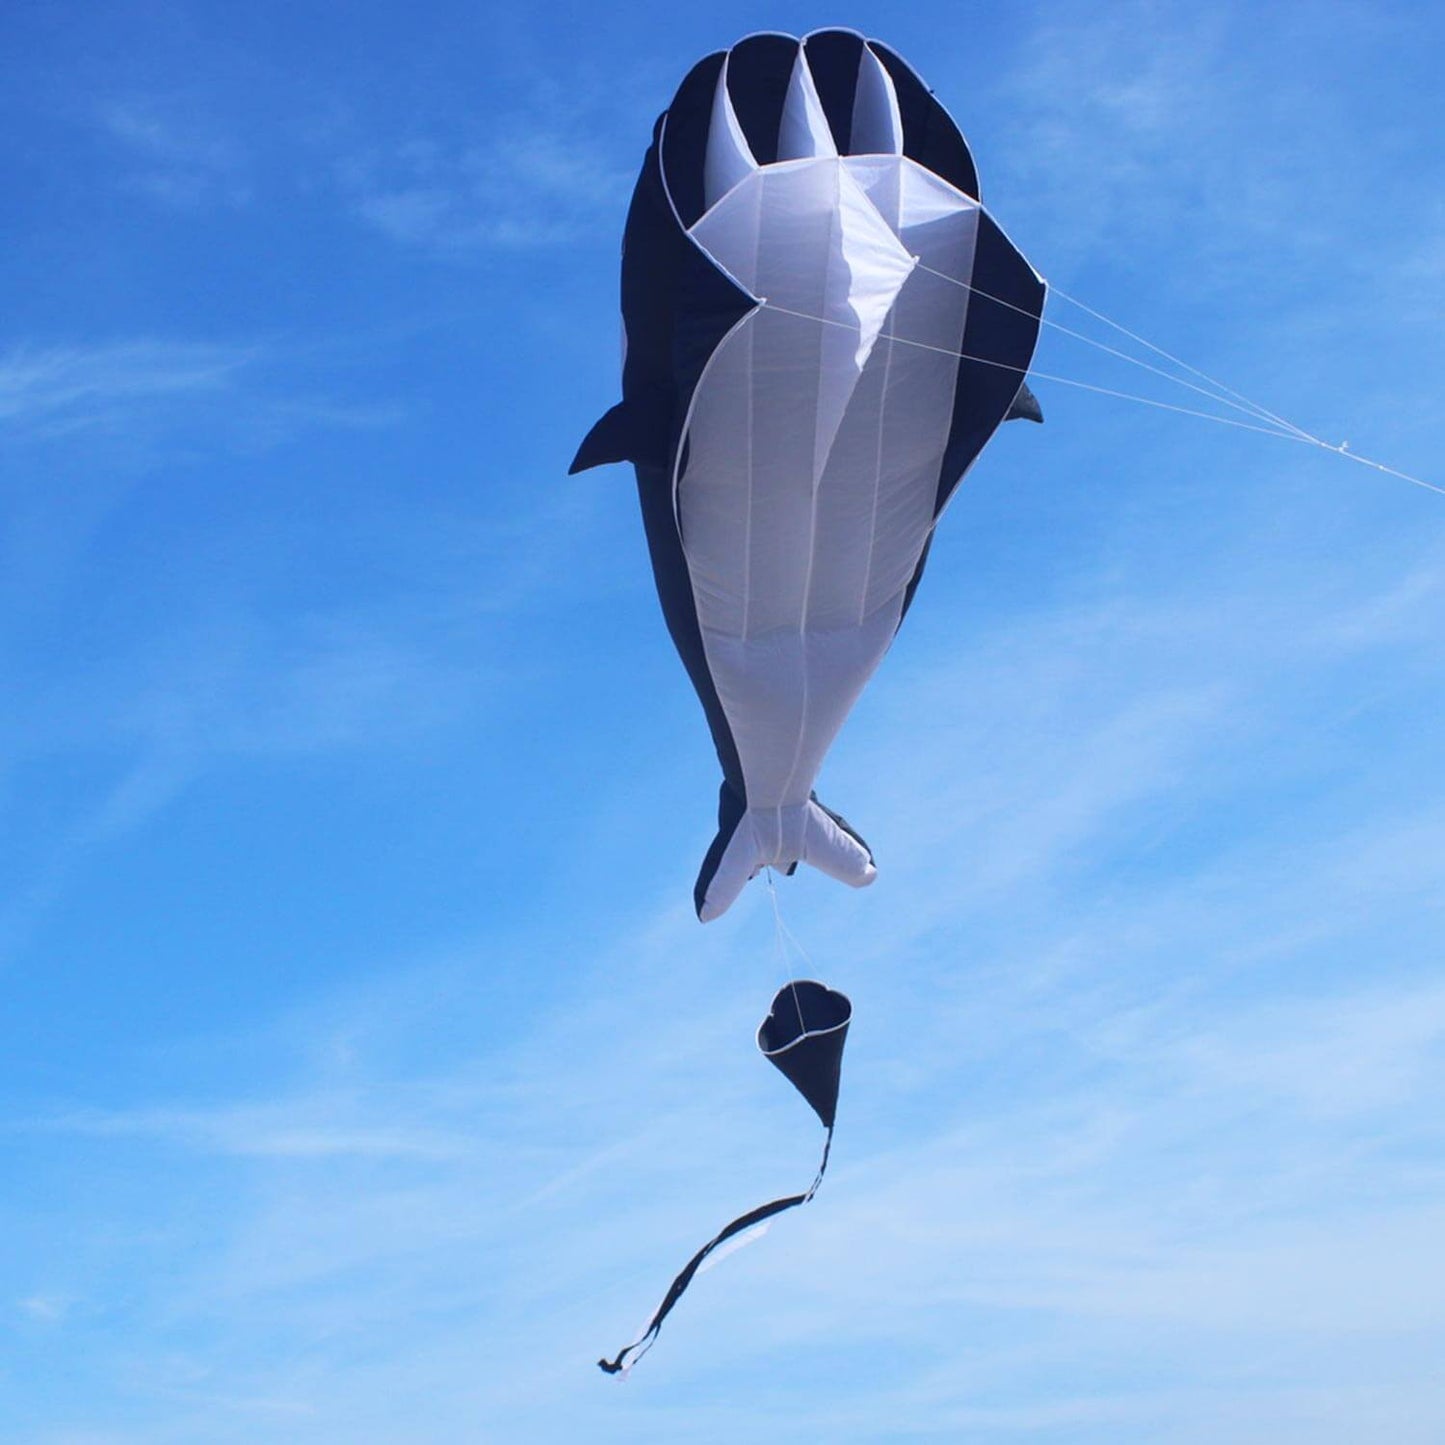 Wolkensturmer Willy the whale 3d foil kite